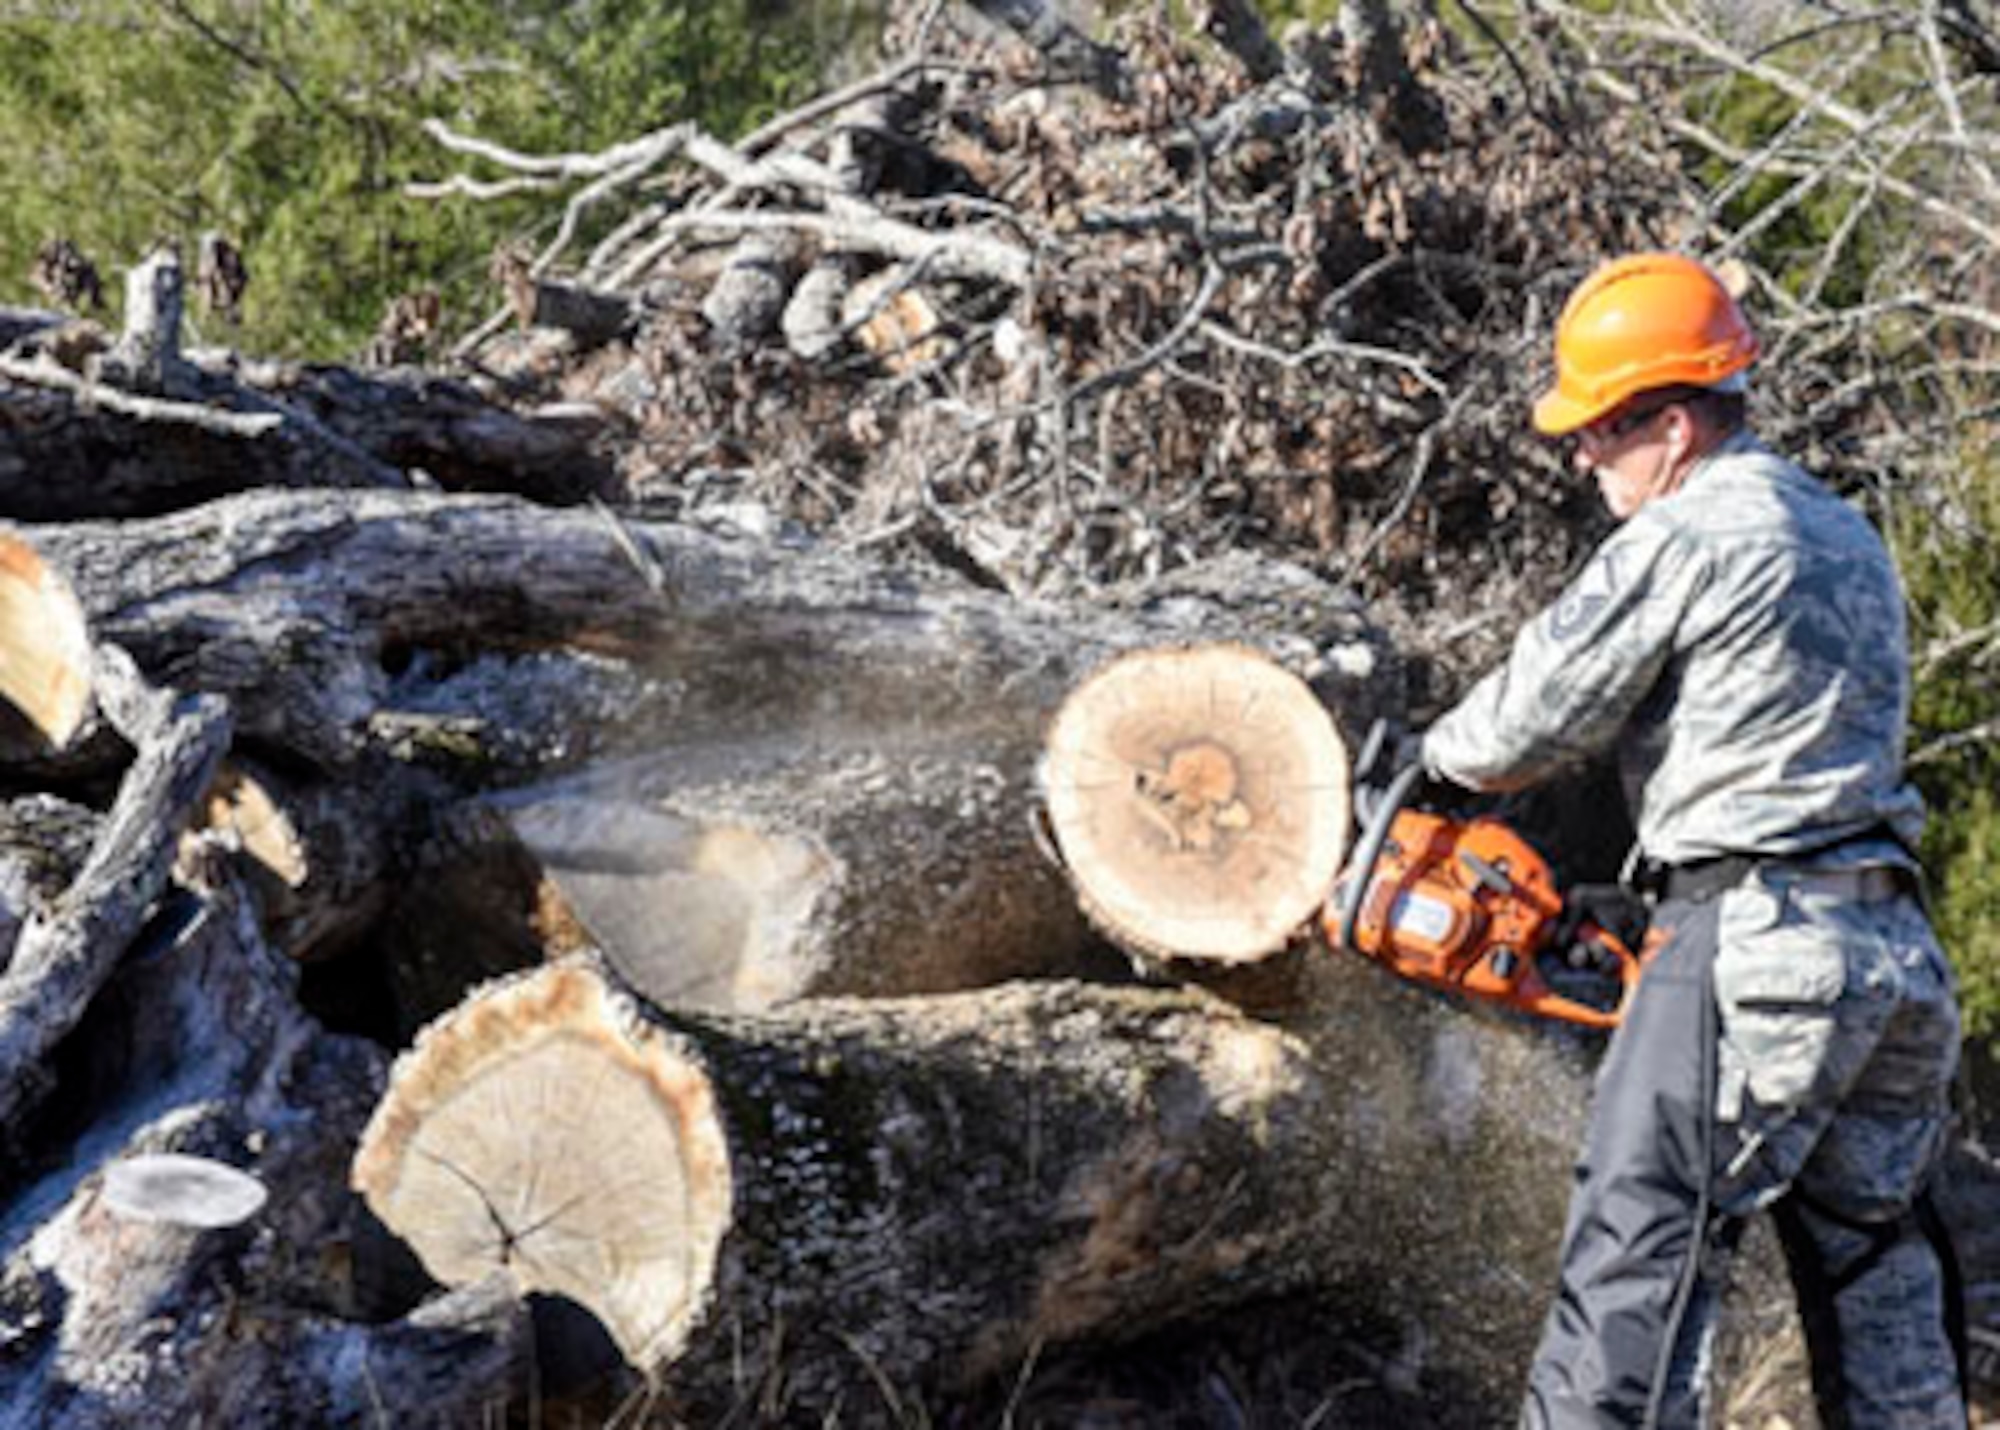 A member of the Rapid Augmentation Team practices utilizing a chainsaw during state active duty training Dec. 20, 2016, at Little Rock Air Force Base, Ark. R.A.T. volunteers were instructed on the proper use of chainsaws, how to avoid and resolve situations involving downed powerlines and the proper installation of tire chains during snow emergencies. (U.S. Air National Guard photo by Tech. Sgt. Jessica Condit)